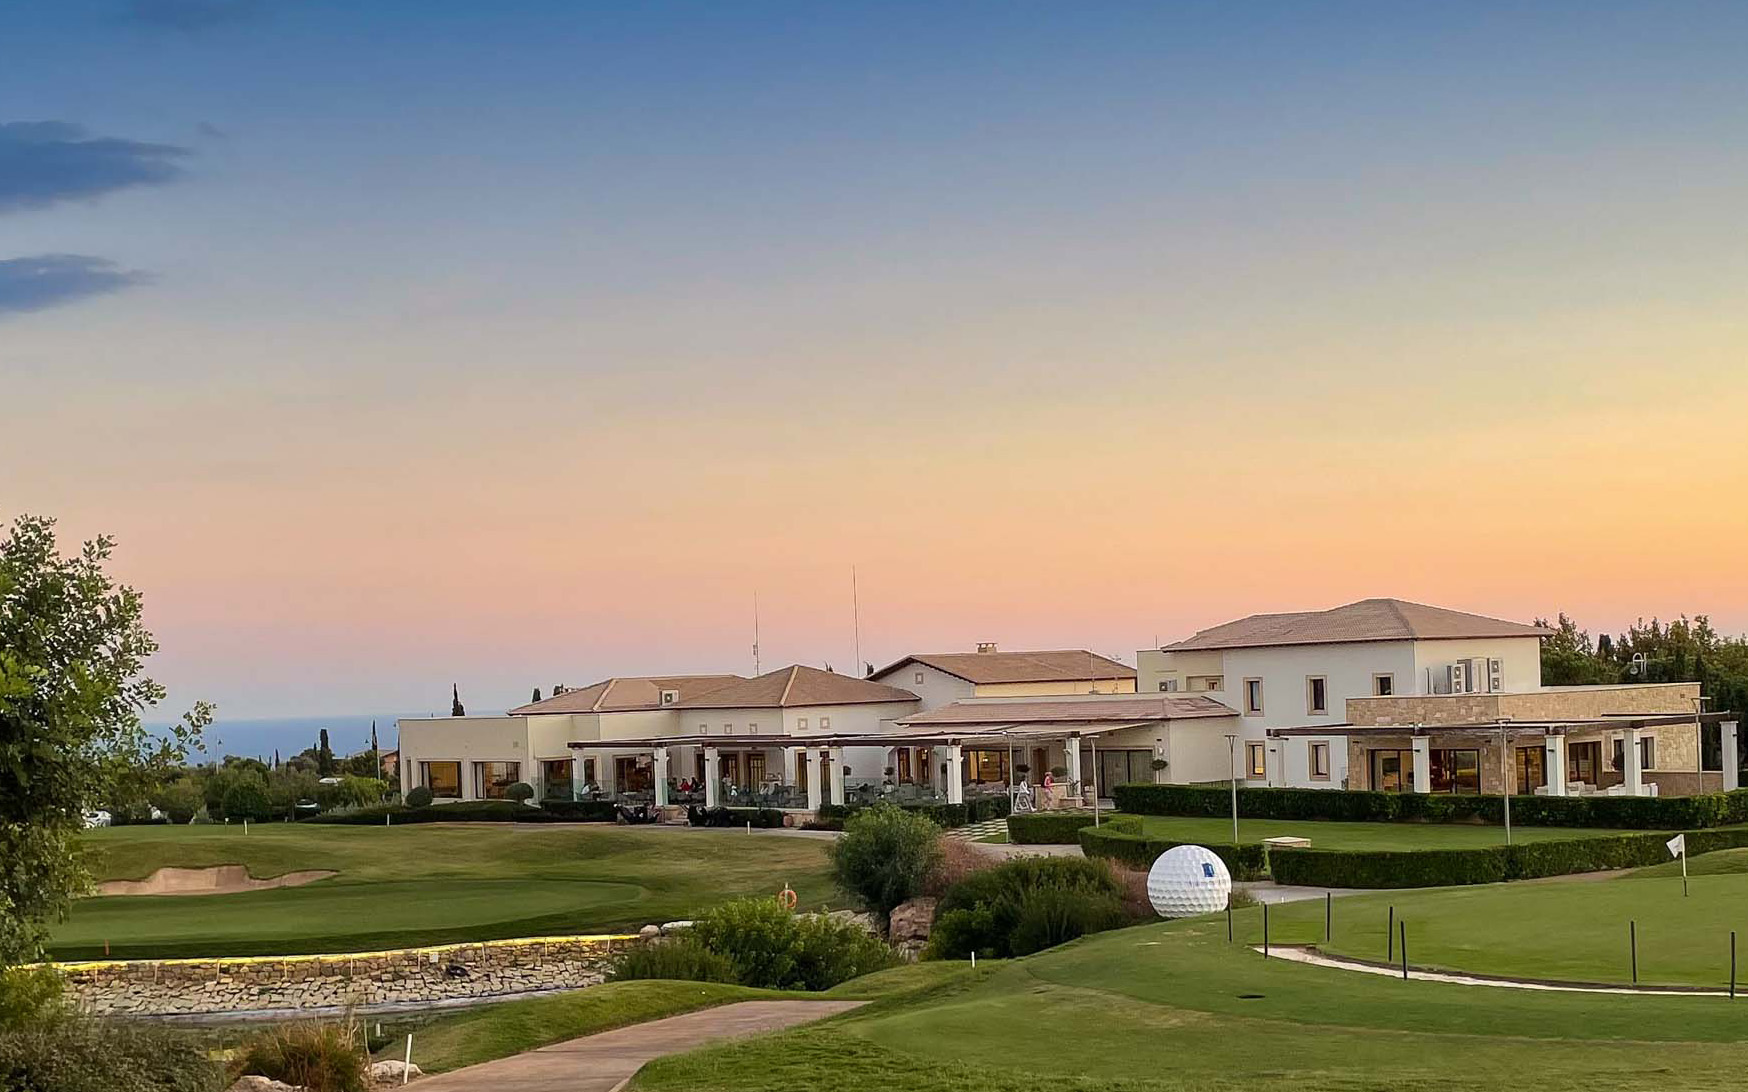 View of the front of the Golf Clubhouse restaurant at Aphrodite Hills Resort, looking over the 18th lake and green, with sunset in the background. Cyprus.